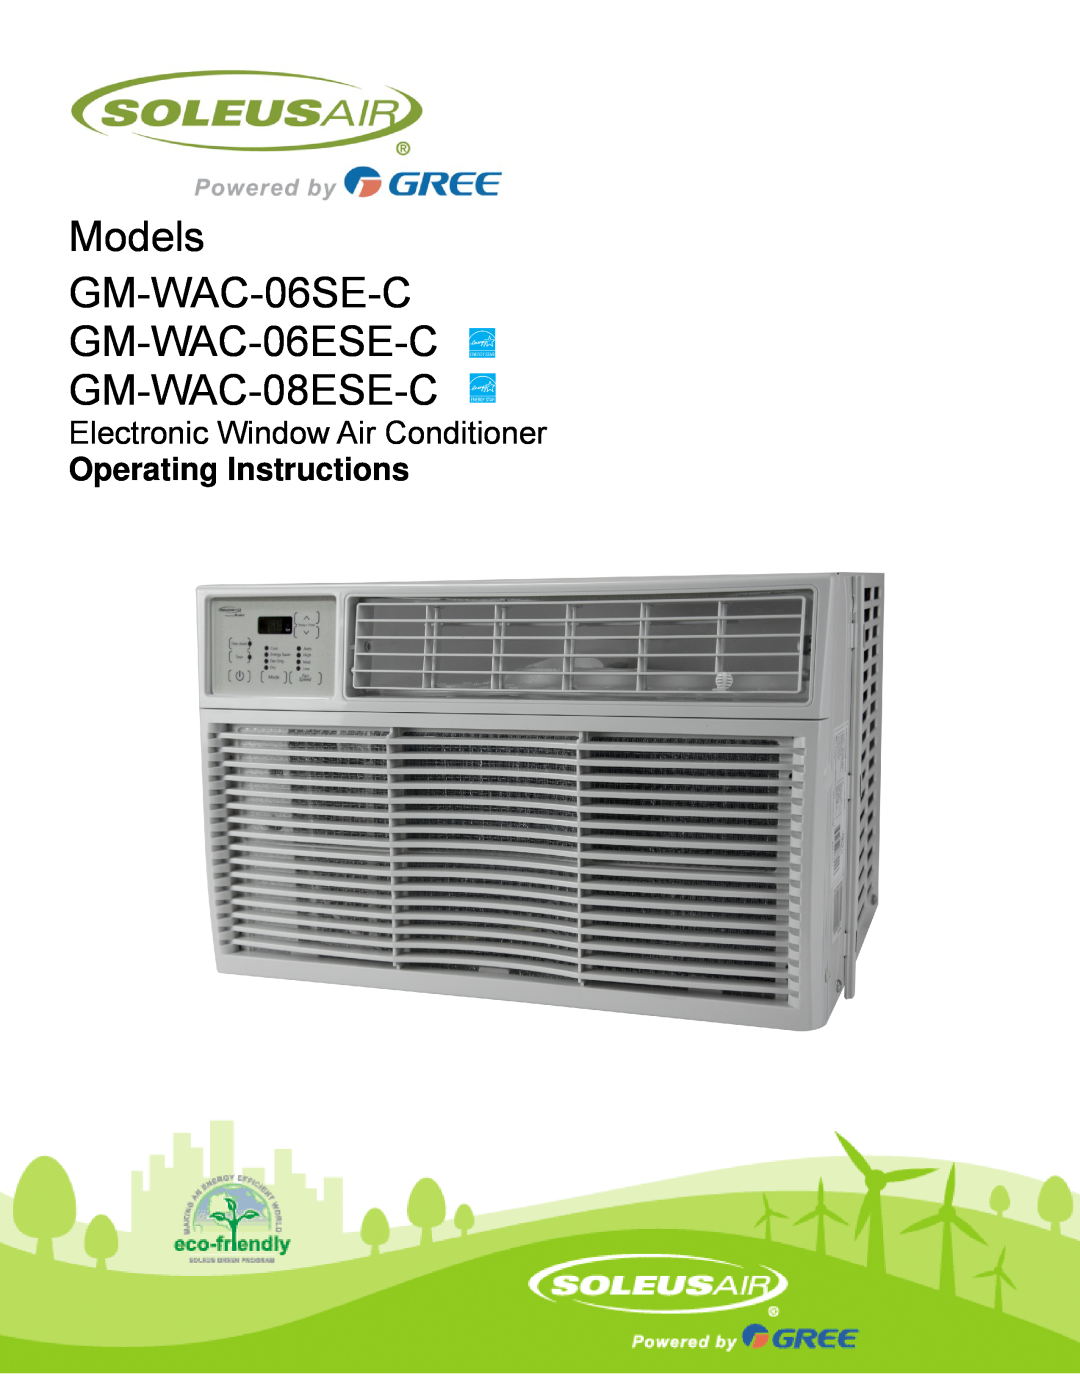 Soleus Air GM-WAC-08ESE-C, GM-WAC-06SE-C, GM-WAC-06ESE-C manual Electronic Window Air Conditioner, Operating Instructions 